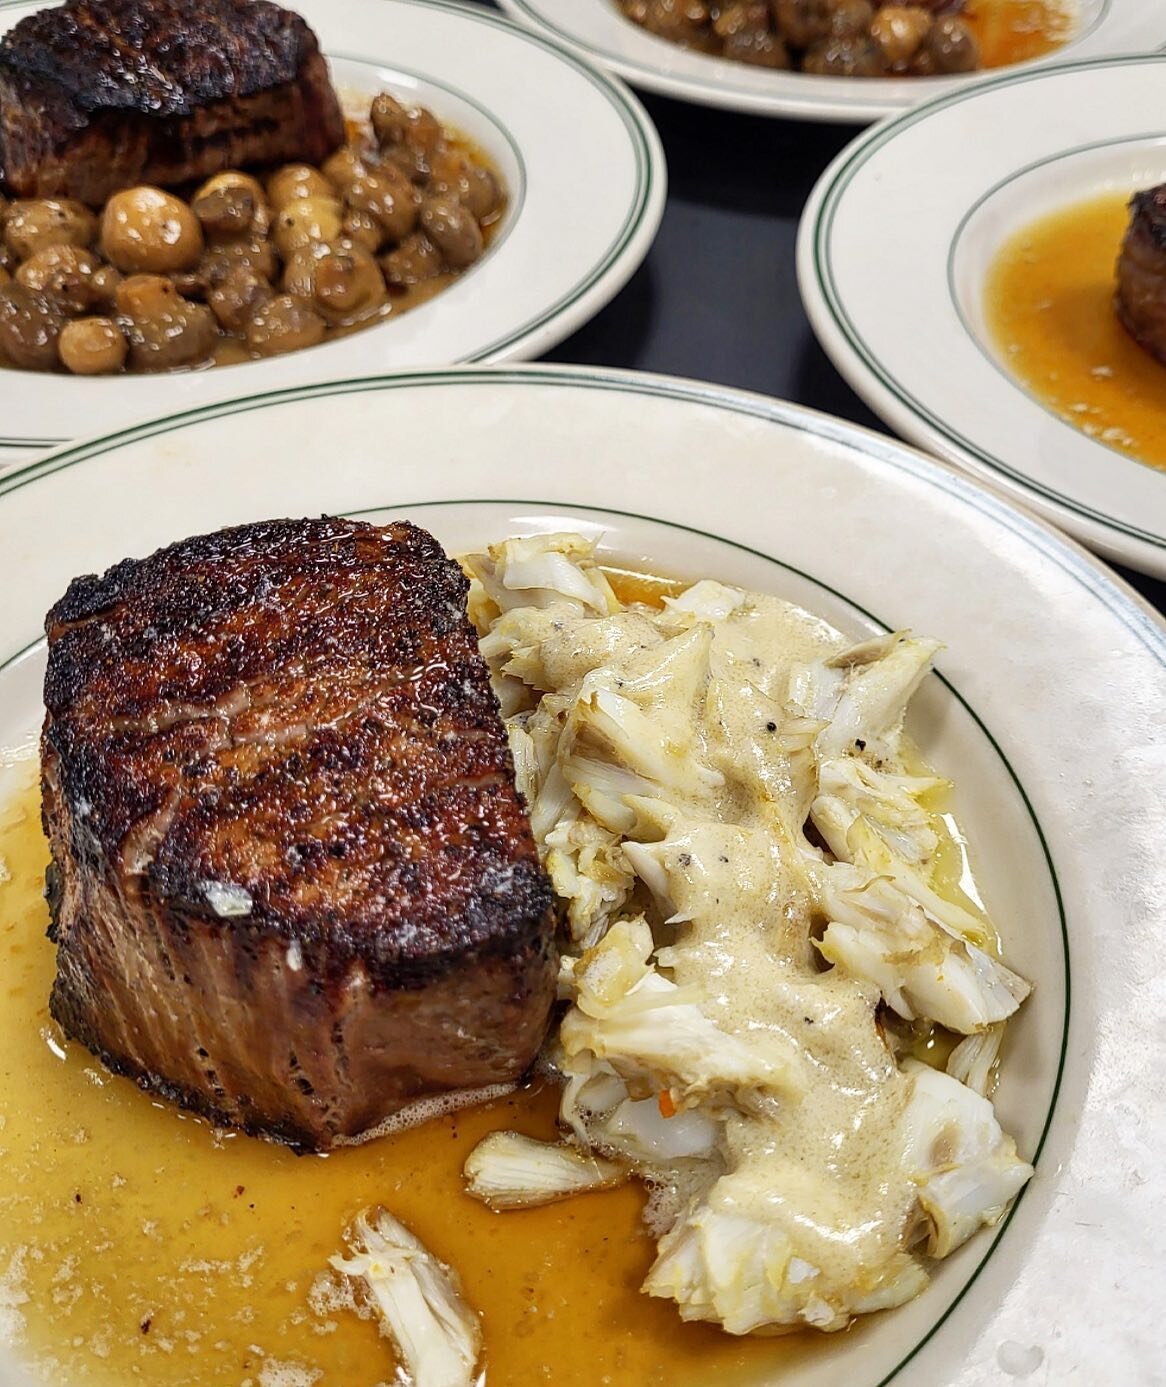 Did you know we will be celebrating our 38th anniversary this month? 🍾
Mark and Mary opened Shapley&rsquo;s in 1985. While our menu has evolved over time, our filet has been a classic fan favorite and was the very cut that made us the destination st